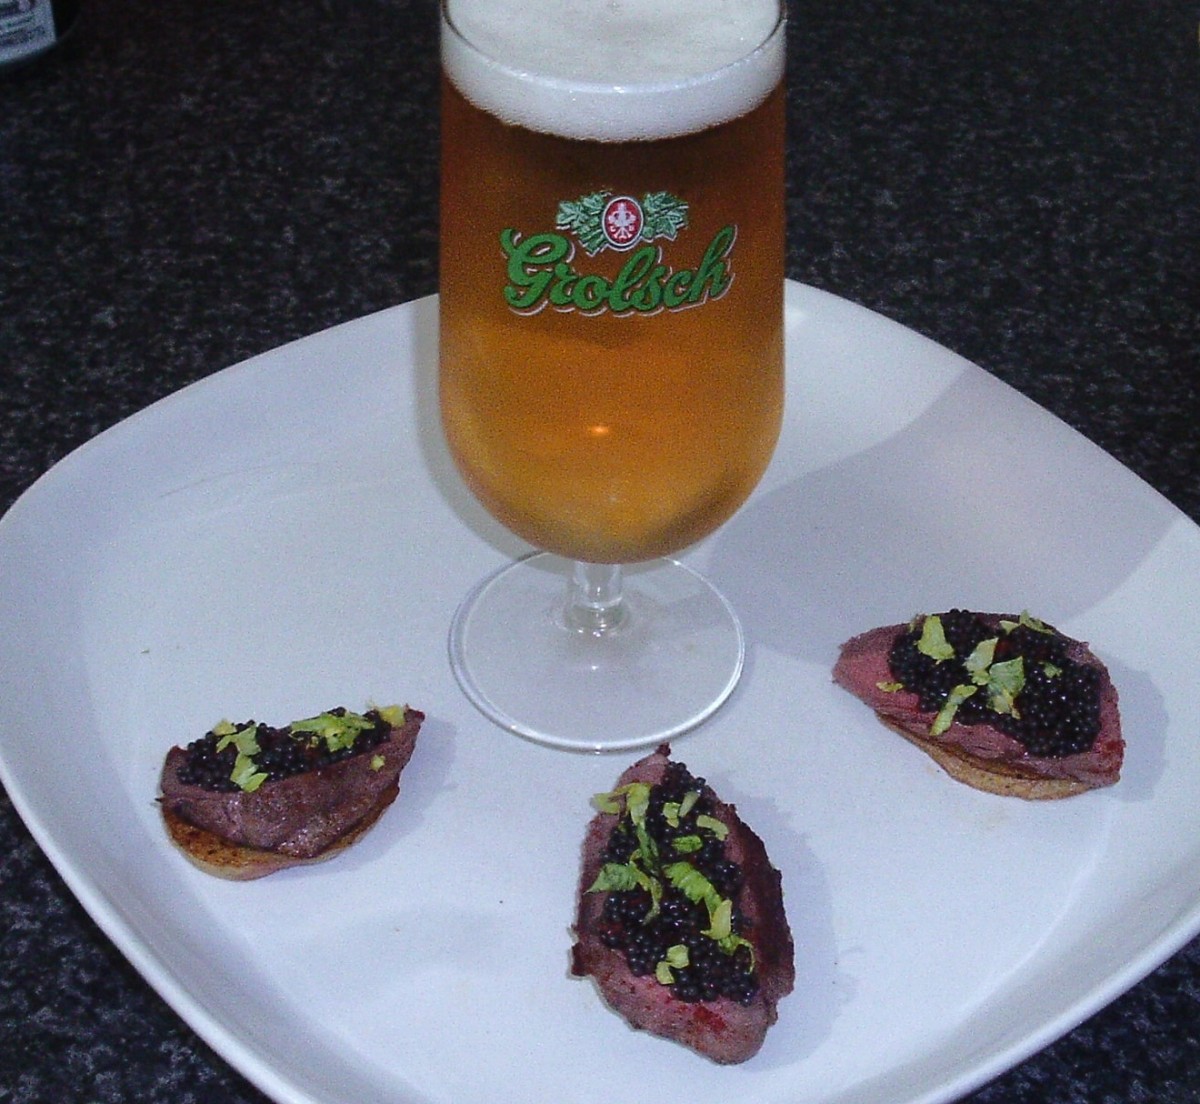 Caviar and sliced pigeon breast on fried potato discs with ice cold beer